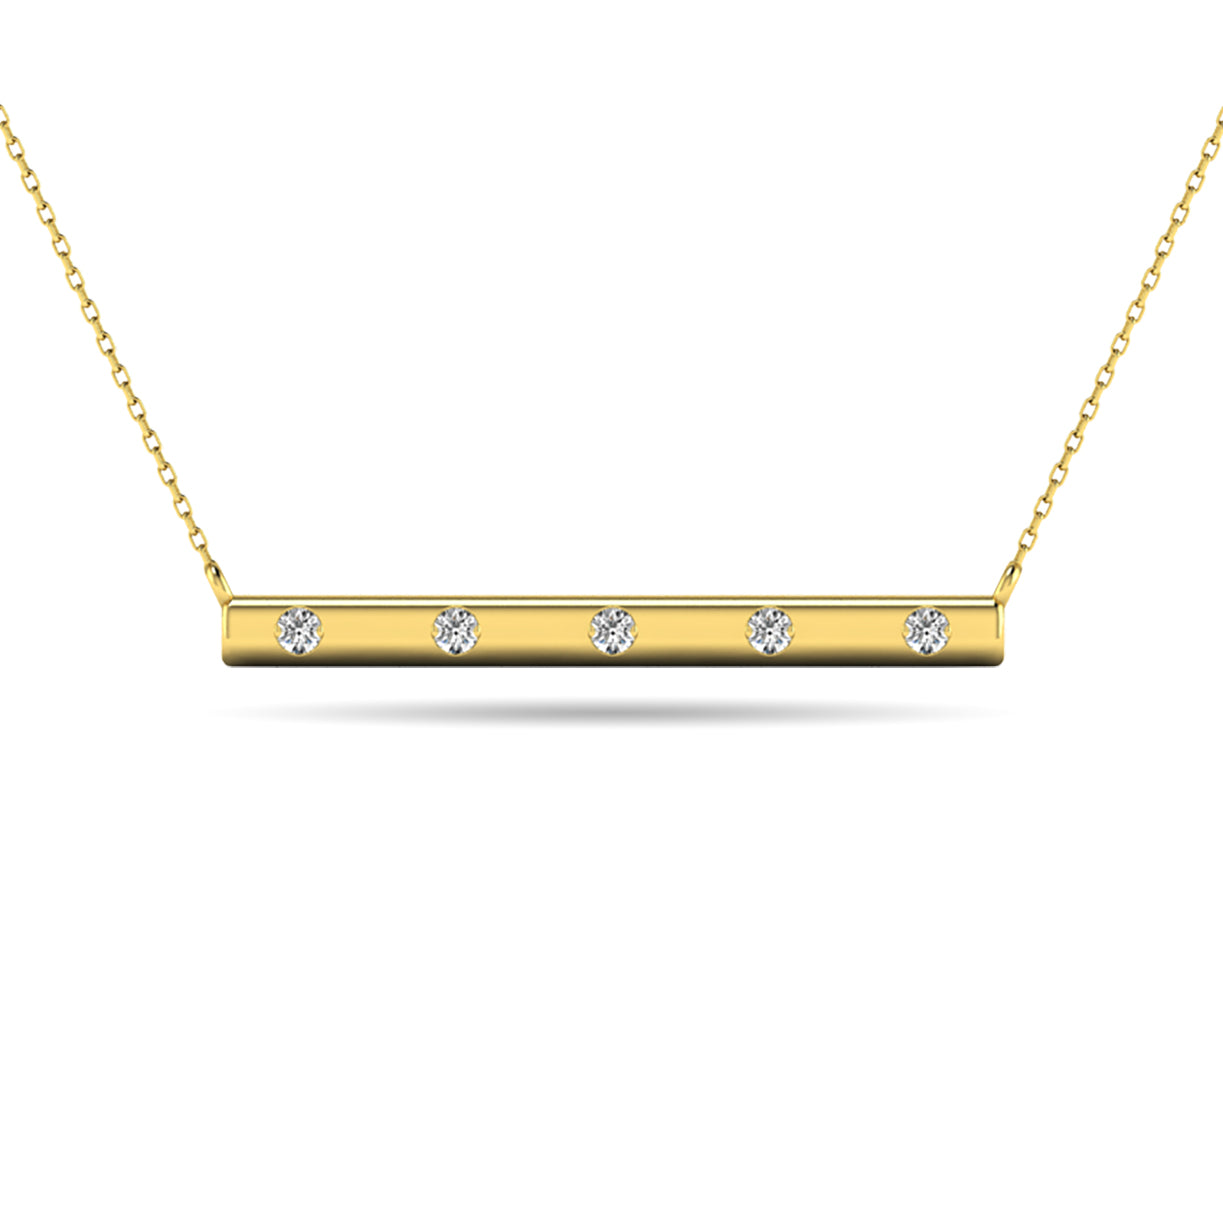 Diamond 1/20 ct tw Bar Necklace in 10K Yellow Gold